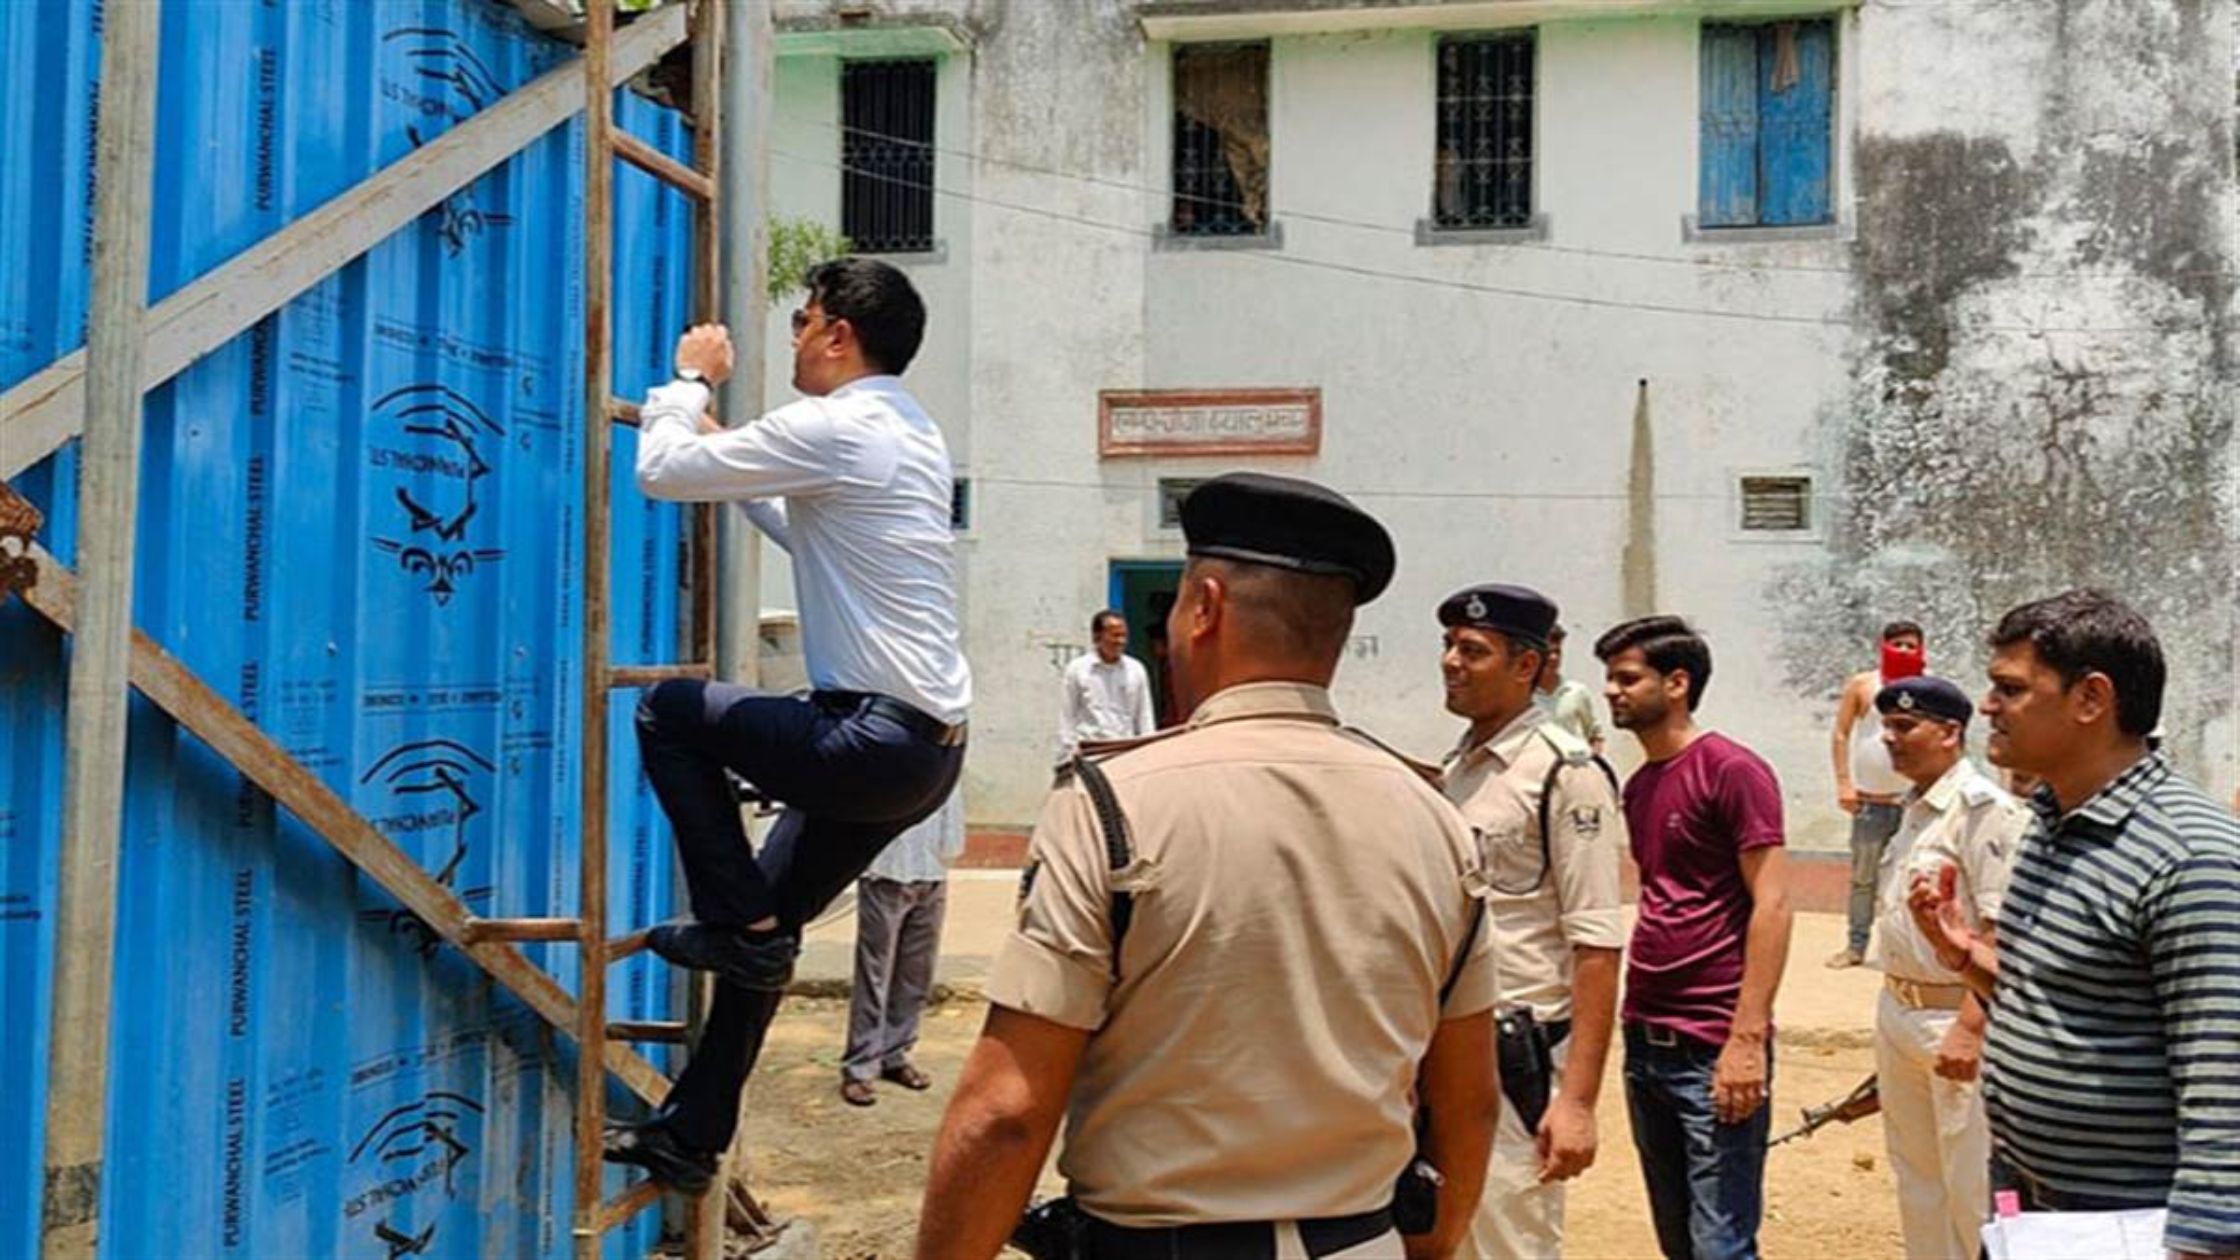 ias officer dharmendra kumar saw the reality by climbing the water tank